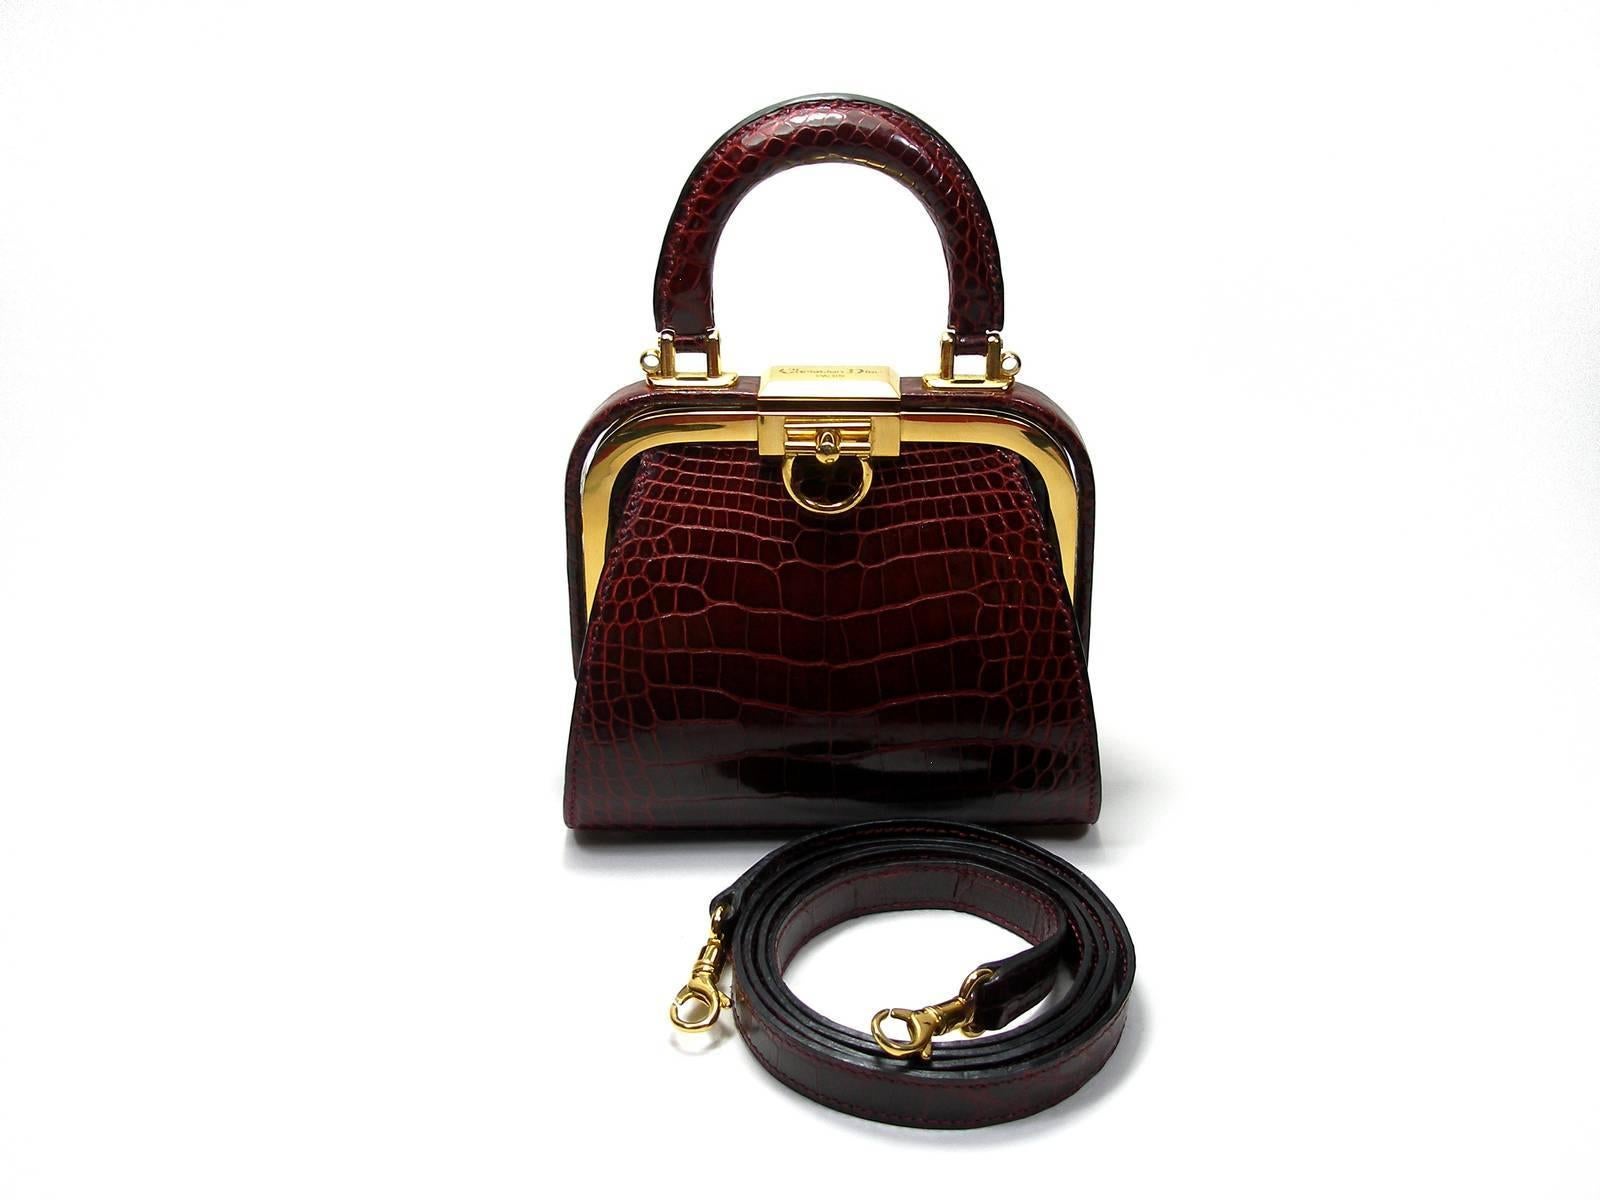 Christian Dior Vintage Rare Doctor Style Micro Handbag in Alligator Leather For Sale 9